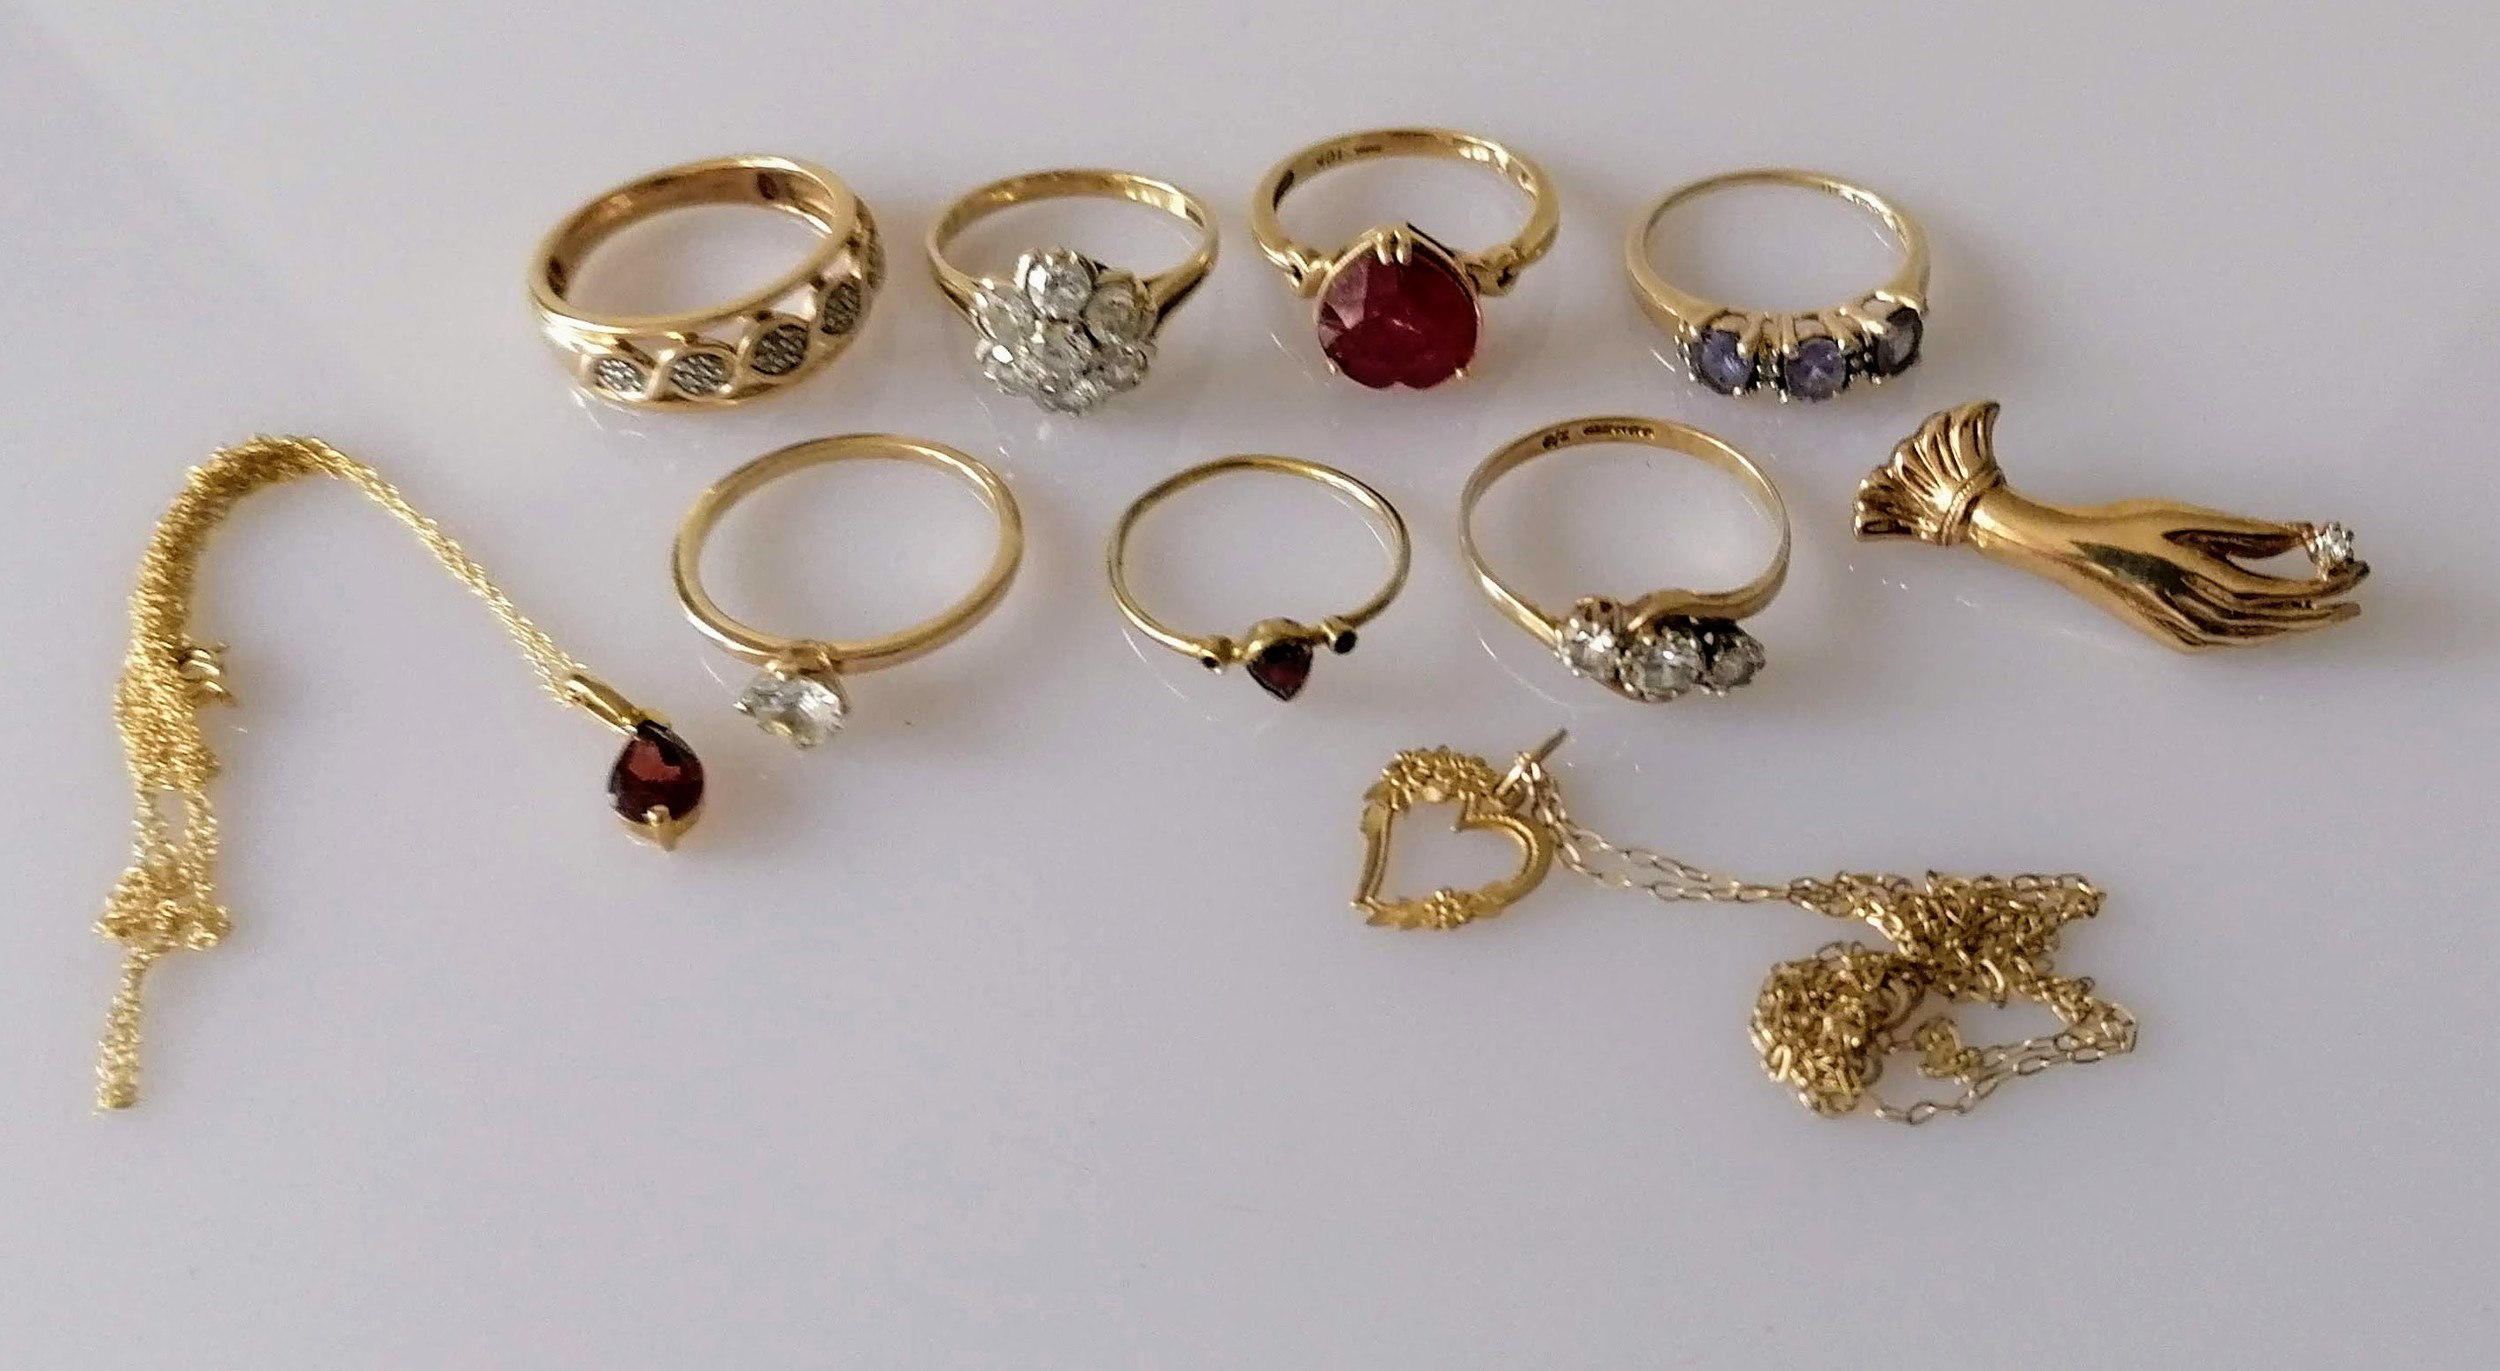 Seven gold gem-set rings, mixed sizes, one brooch and two pendants, all hallmarked 9ct, 19.32g (10) - Image 2 of 2